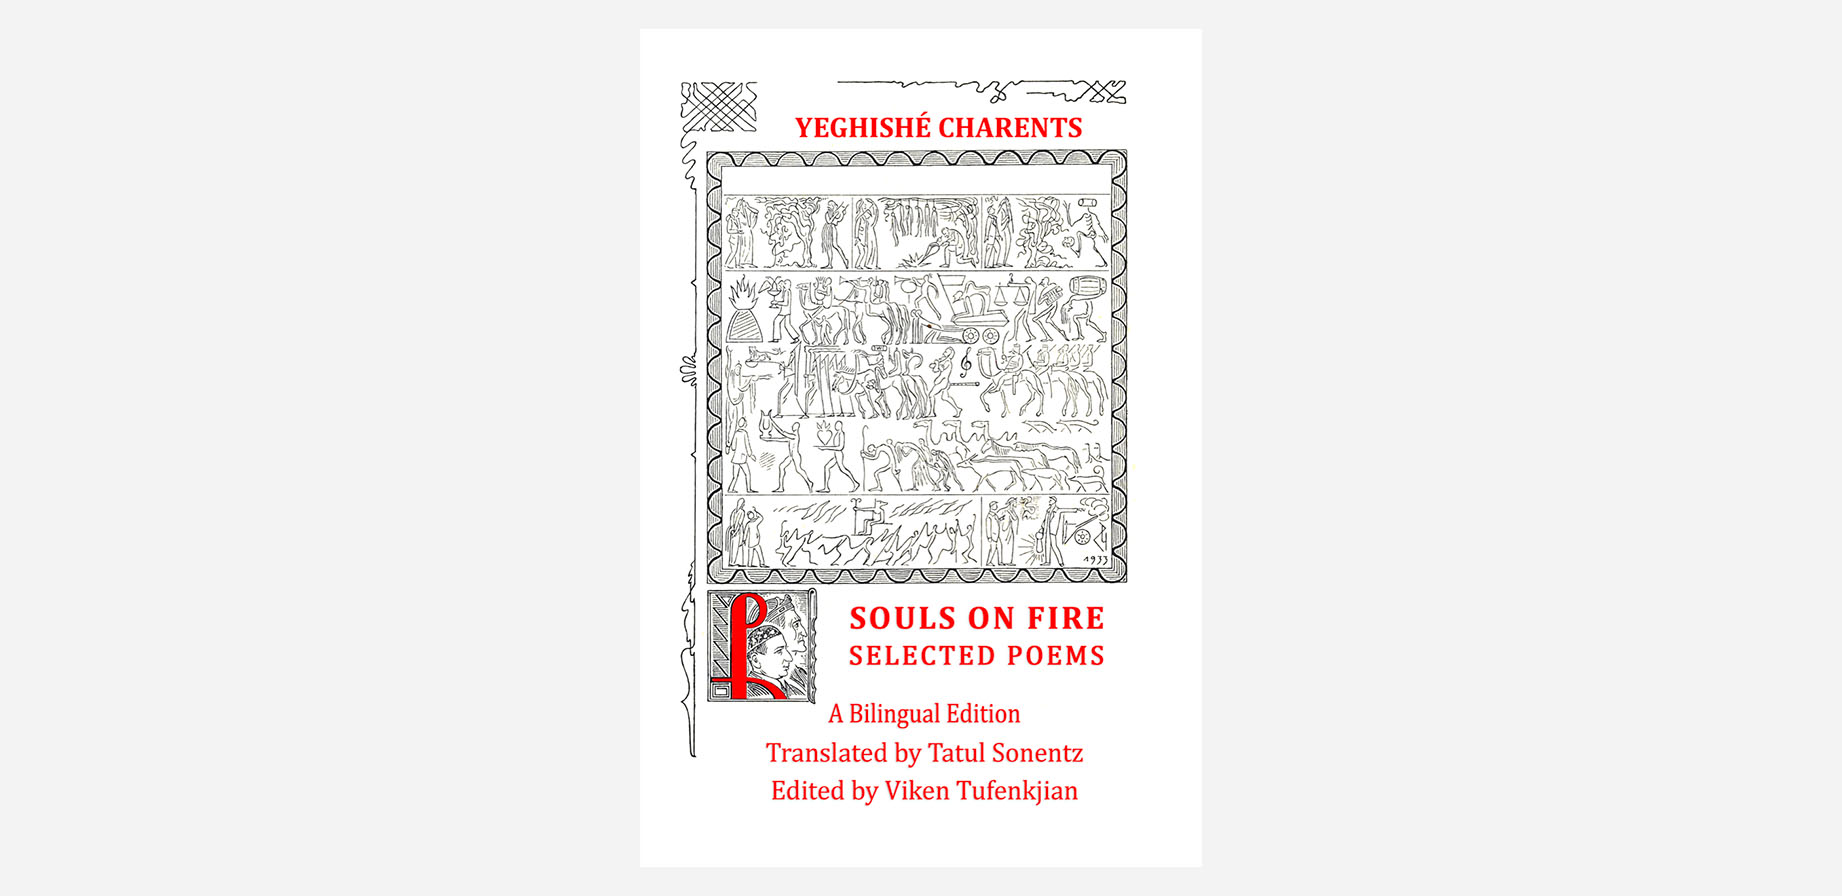 Souls on Fire: Selected Poems by Yeghishé Charents